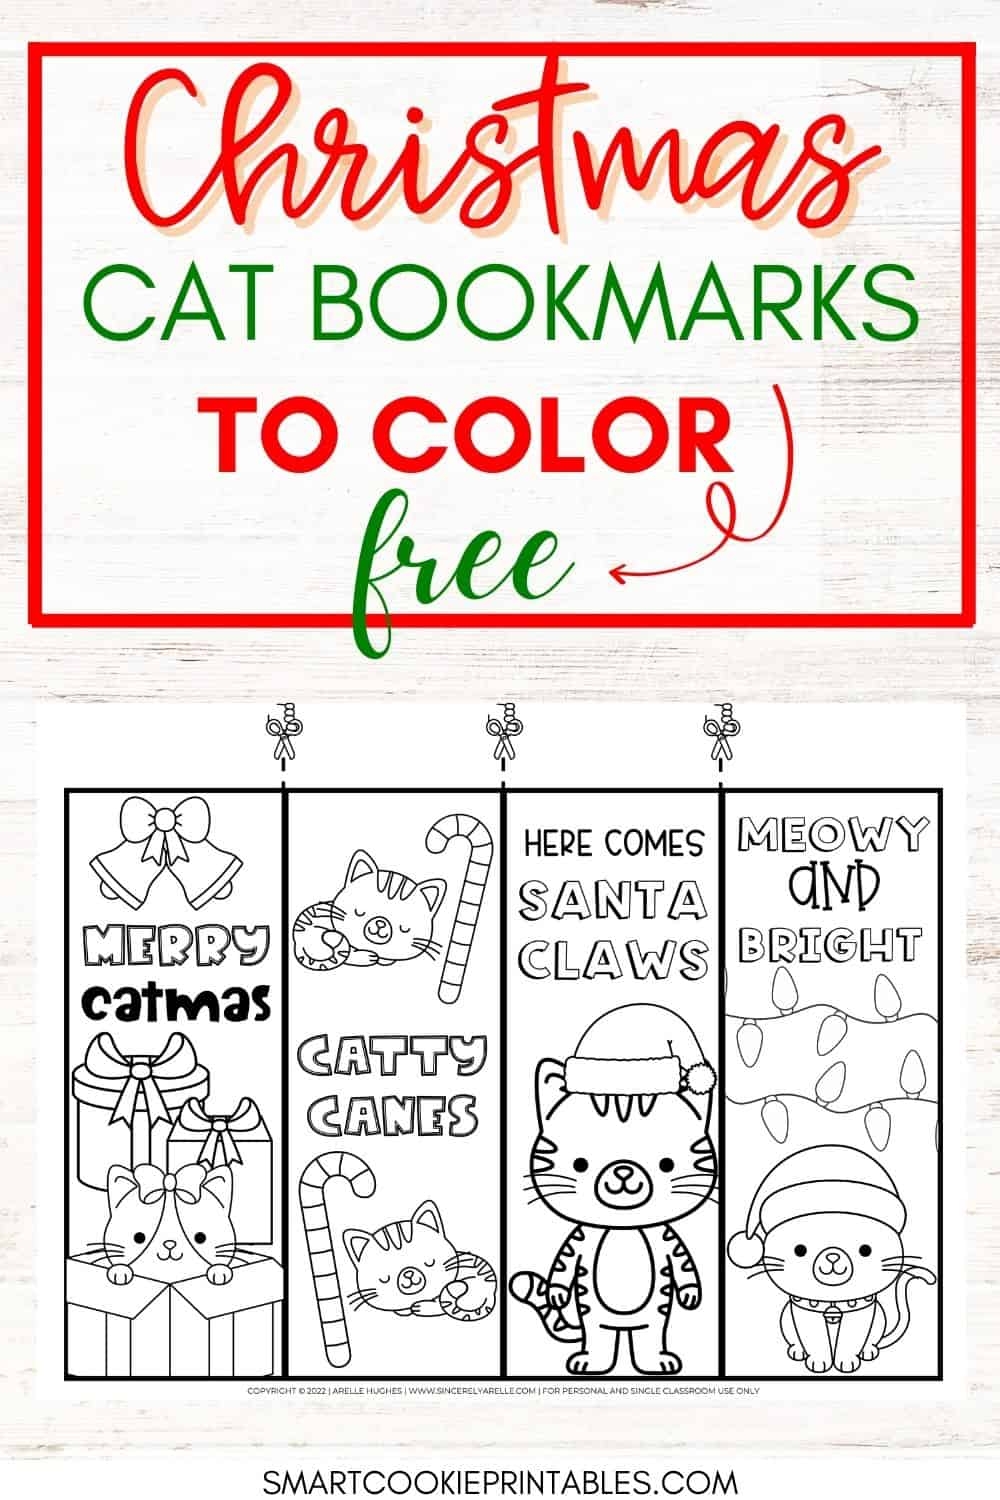 Free Printable Cute Christmas Cat Bookmarks To Color Smart Cookie Printables - Free Printable Bookmarks For Christmas